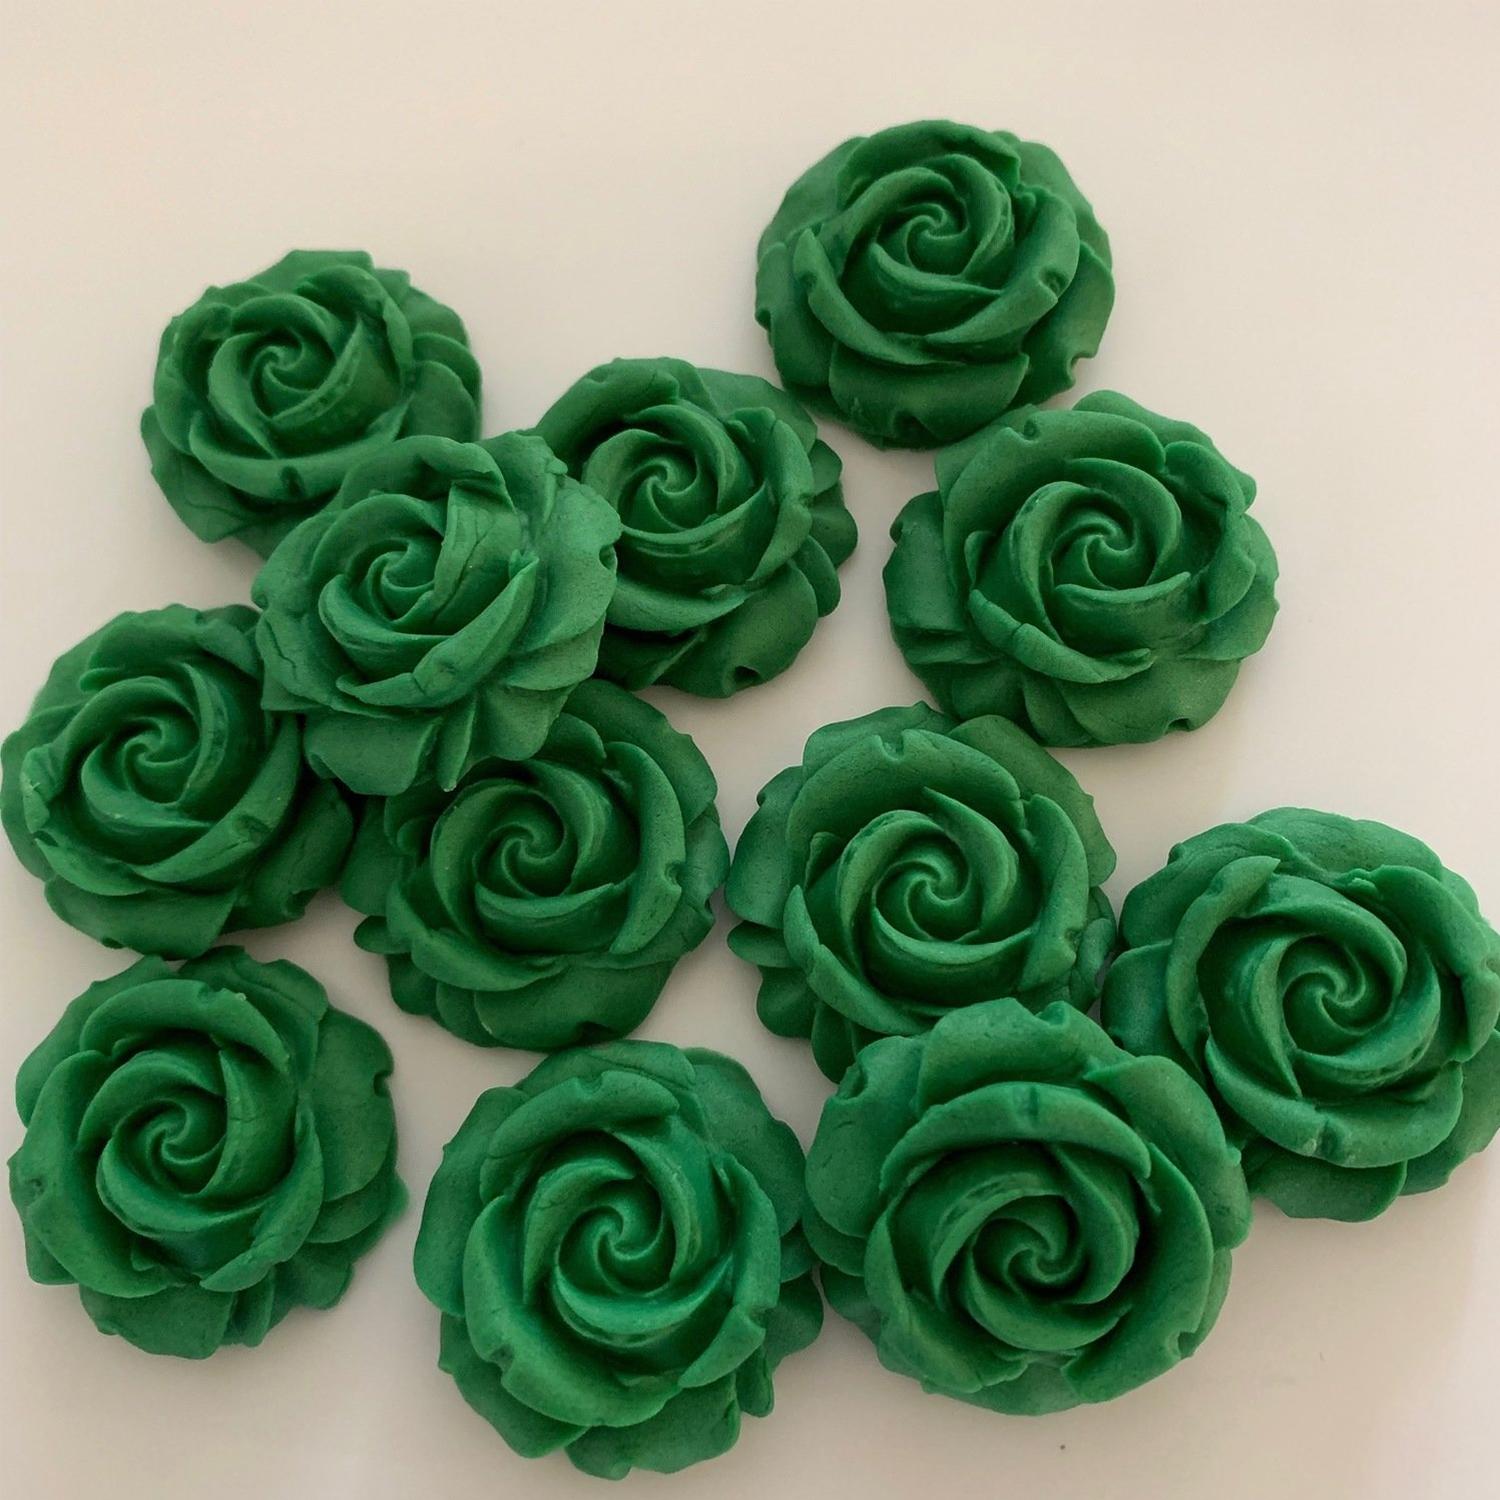 SUPER CAKES SMALL ROSE FLOWERS GREEN